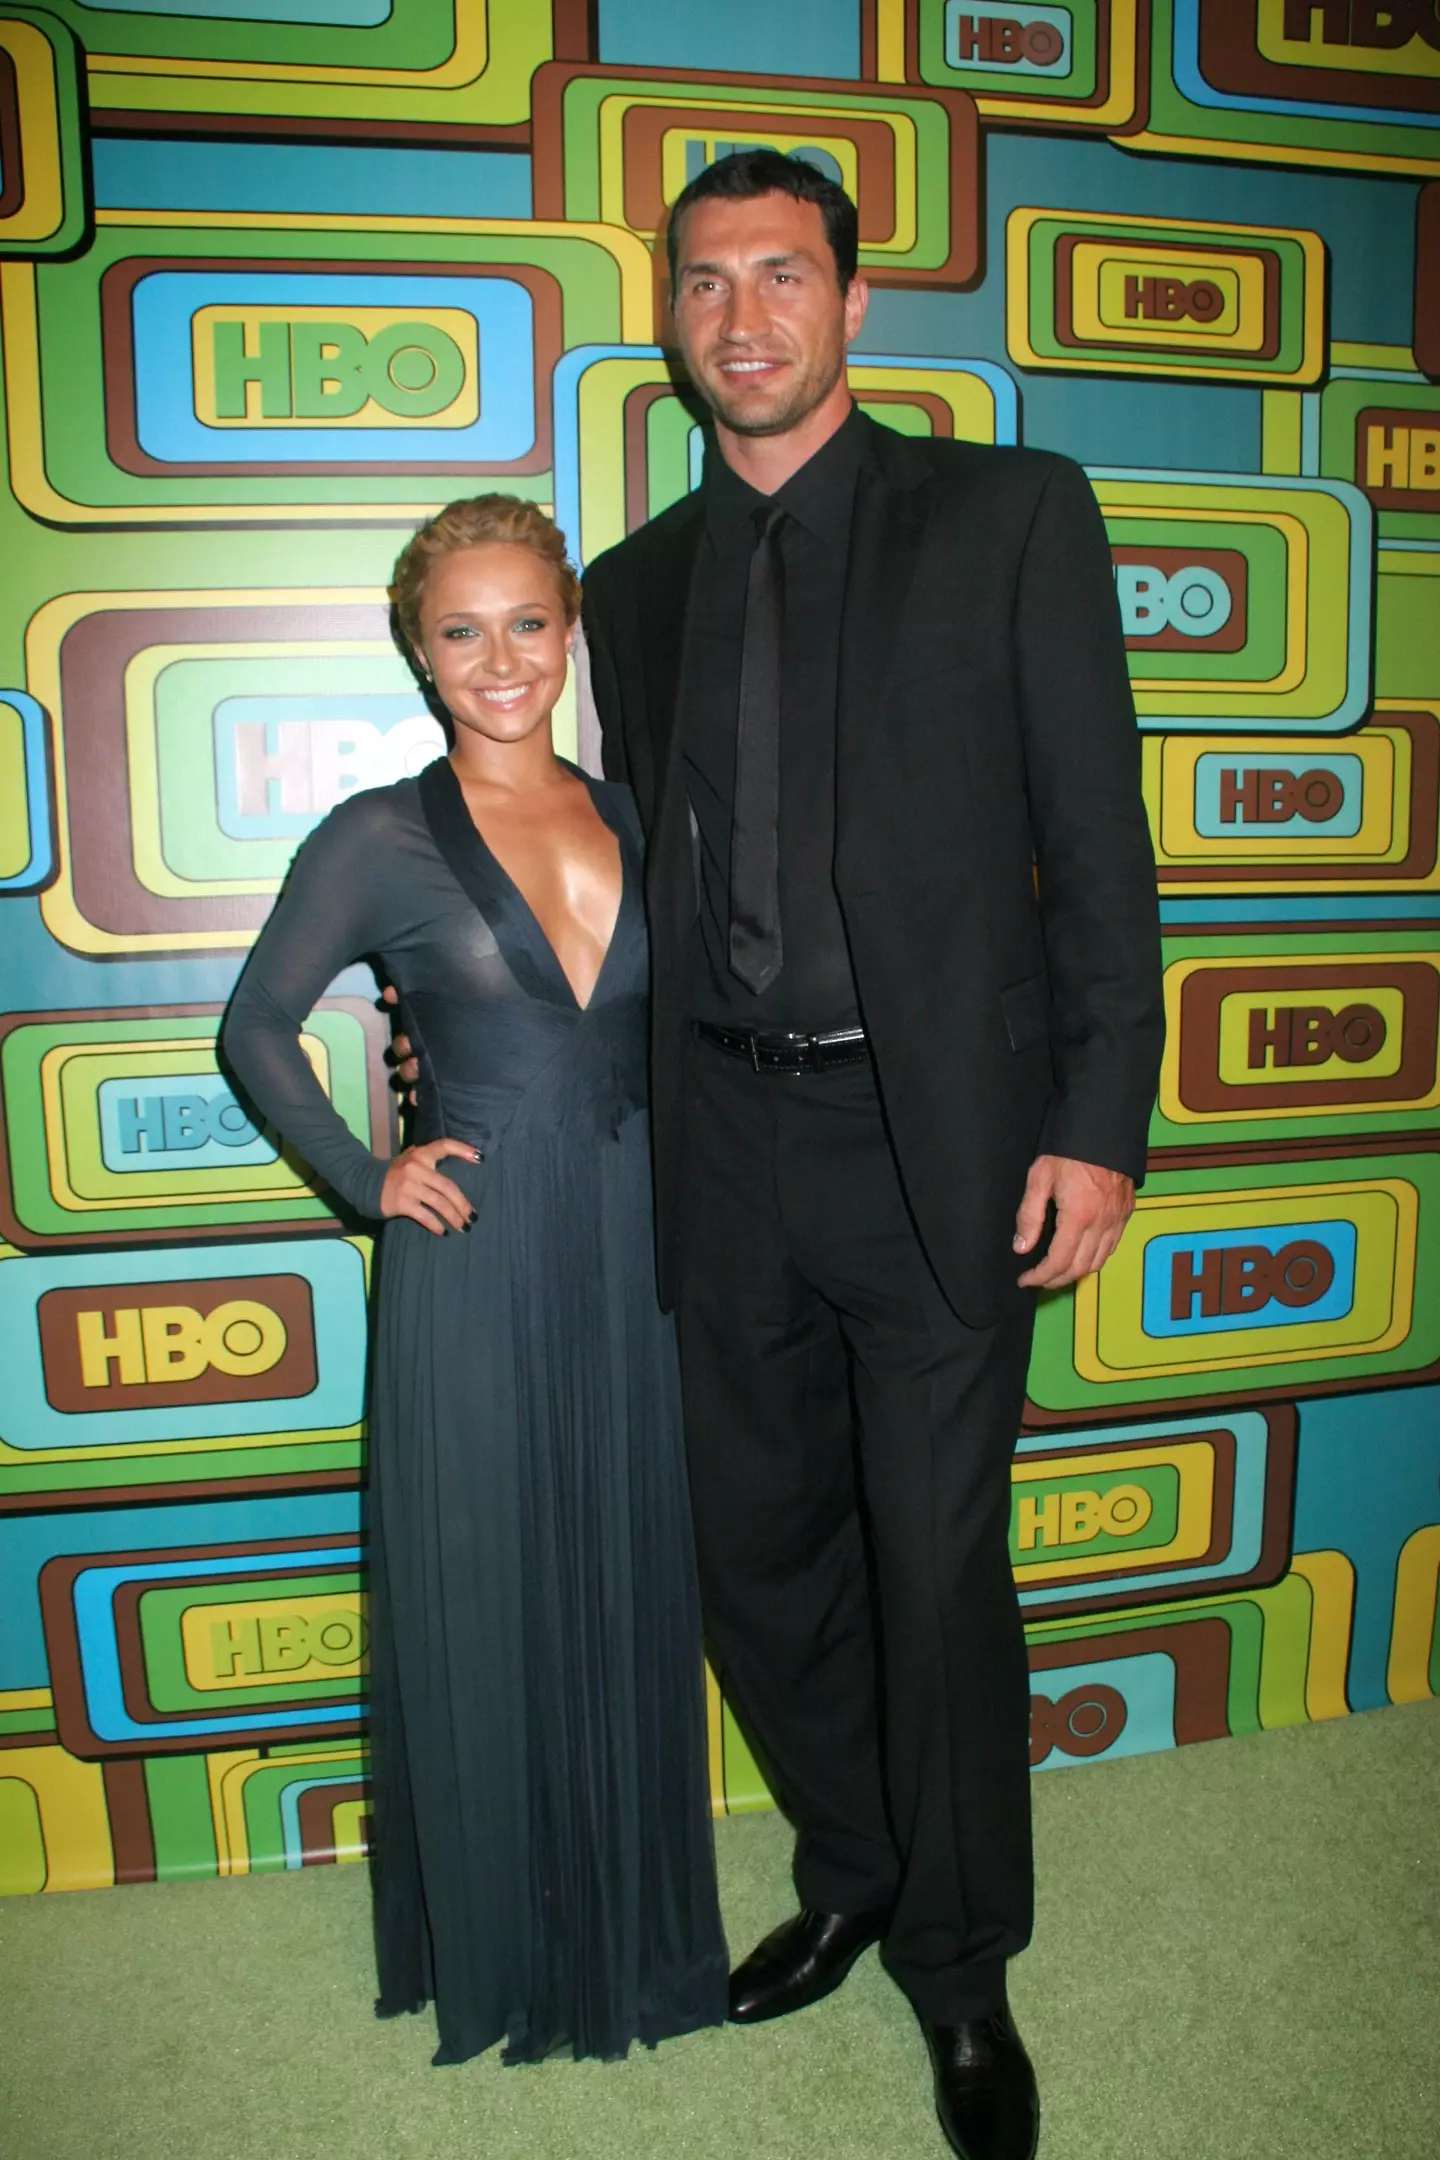 Panettiere and Klitschko dated on and off between 2009 and 2018.